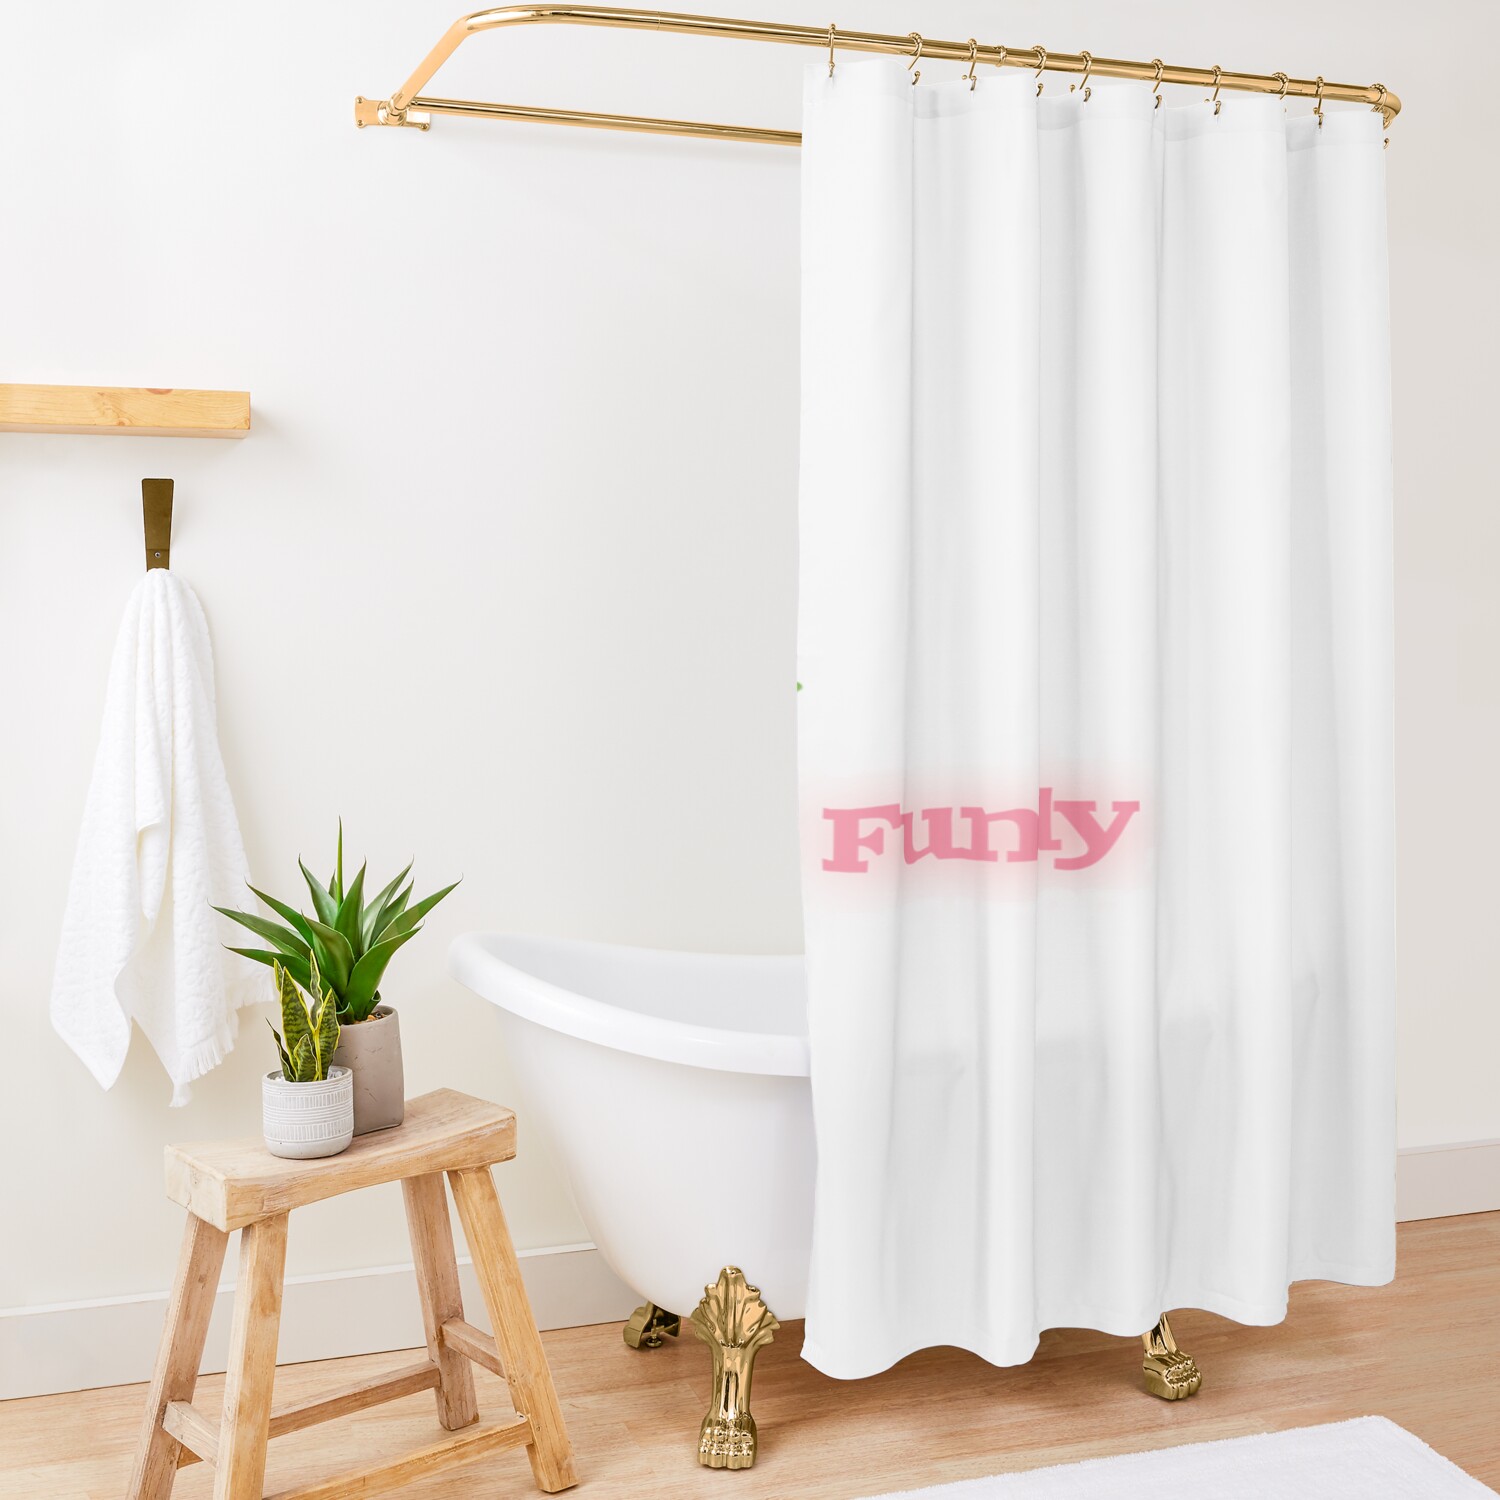 urshower curtain opensquare1500x1500 2 - Fundy Shop